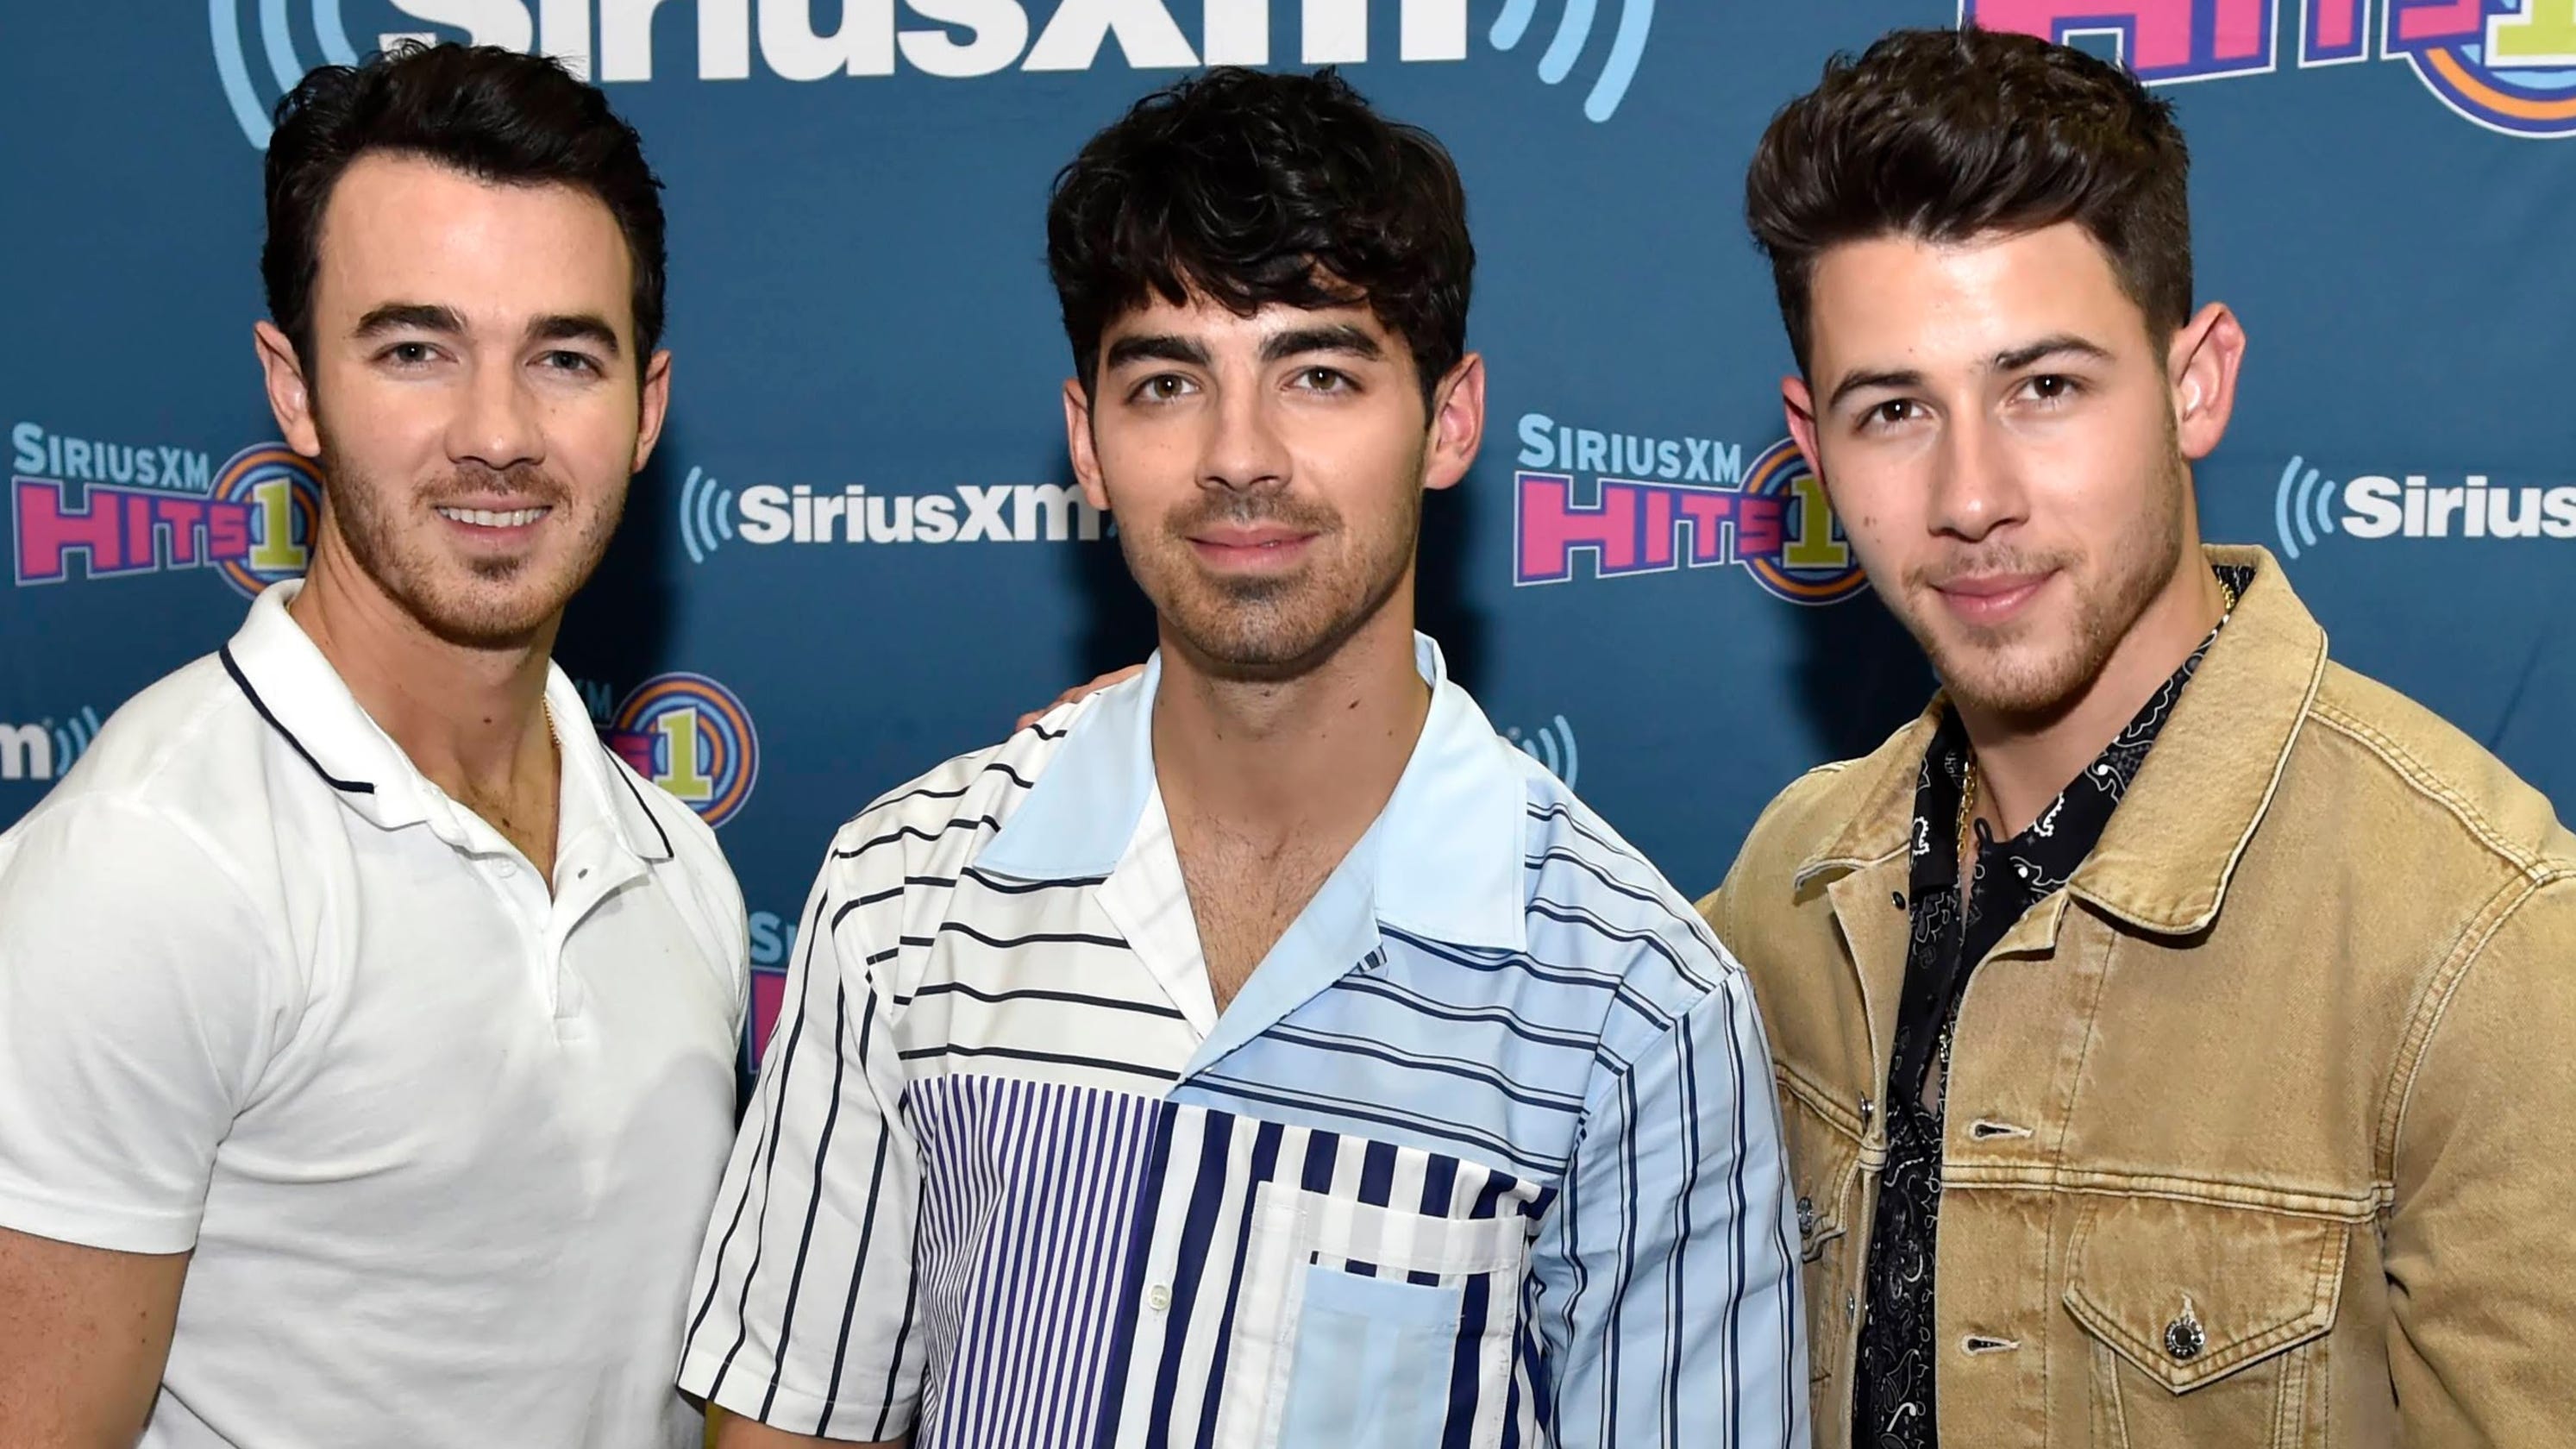 Jonas Brothers 'Happiness Begins' tour will make stop in ...